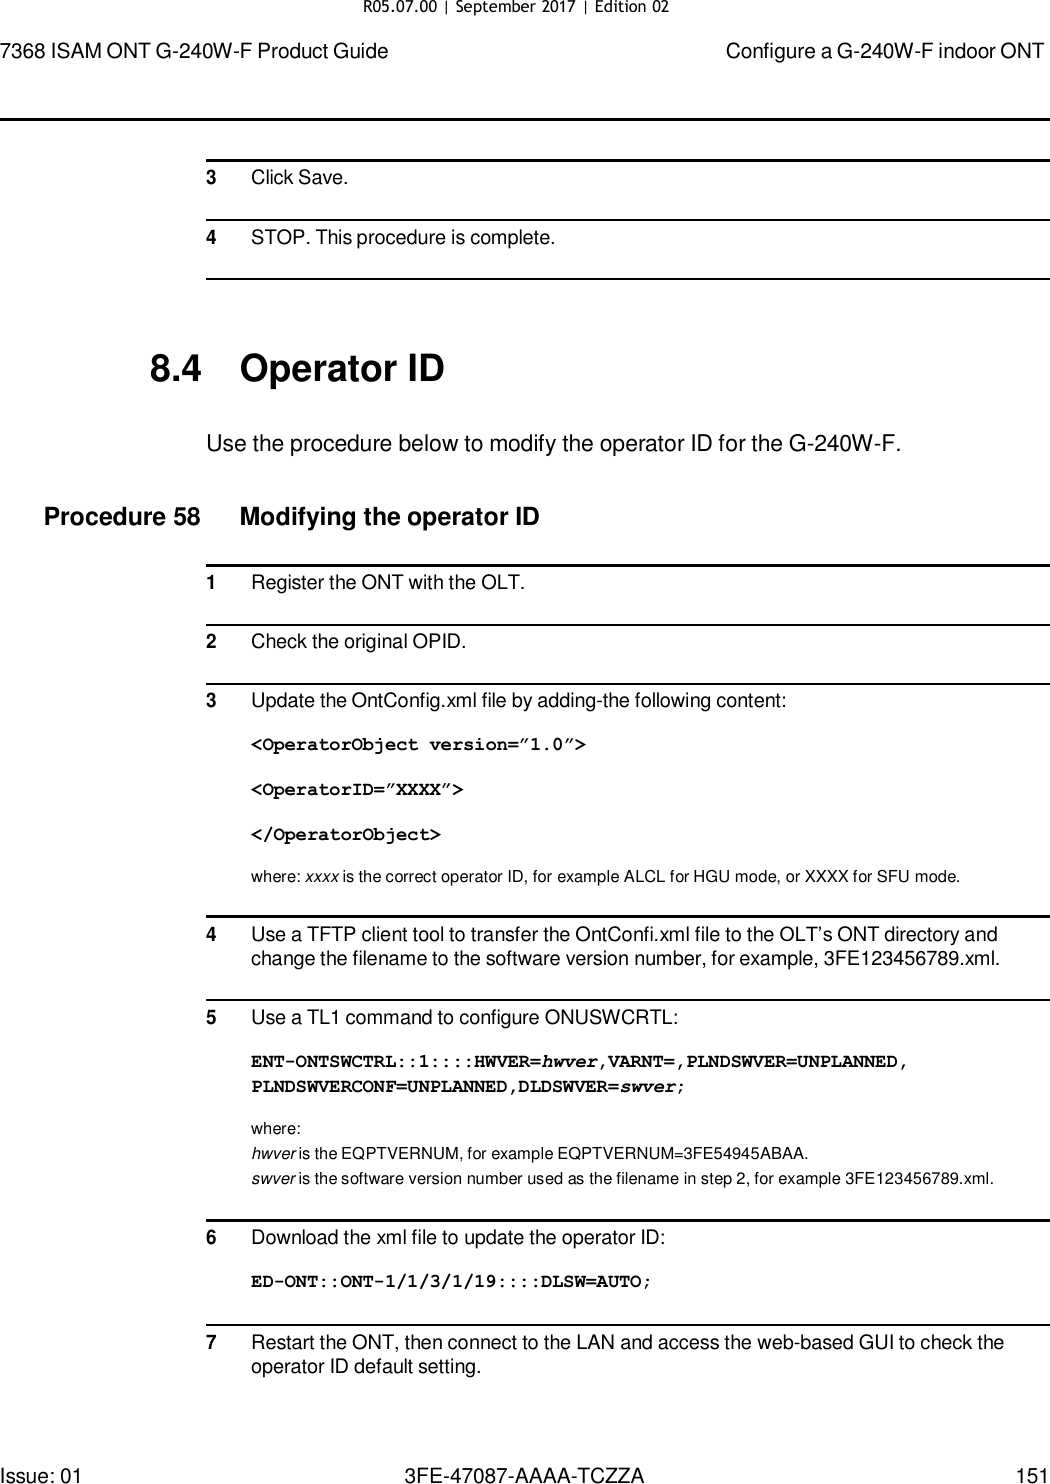 Page 145 of Nokia Bell G240WFV2 7368 ISAM GPON ONU User Manual 7368 ISAM ONT G 240W F Product Guide